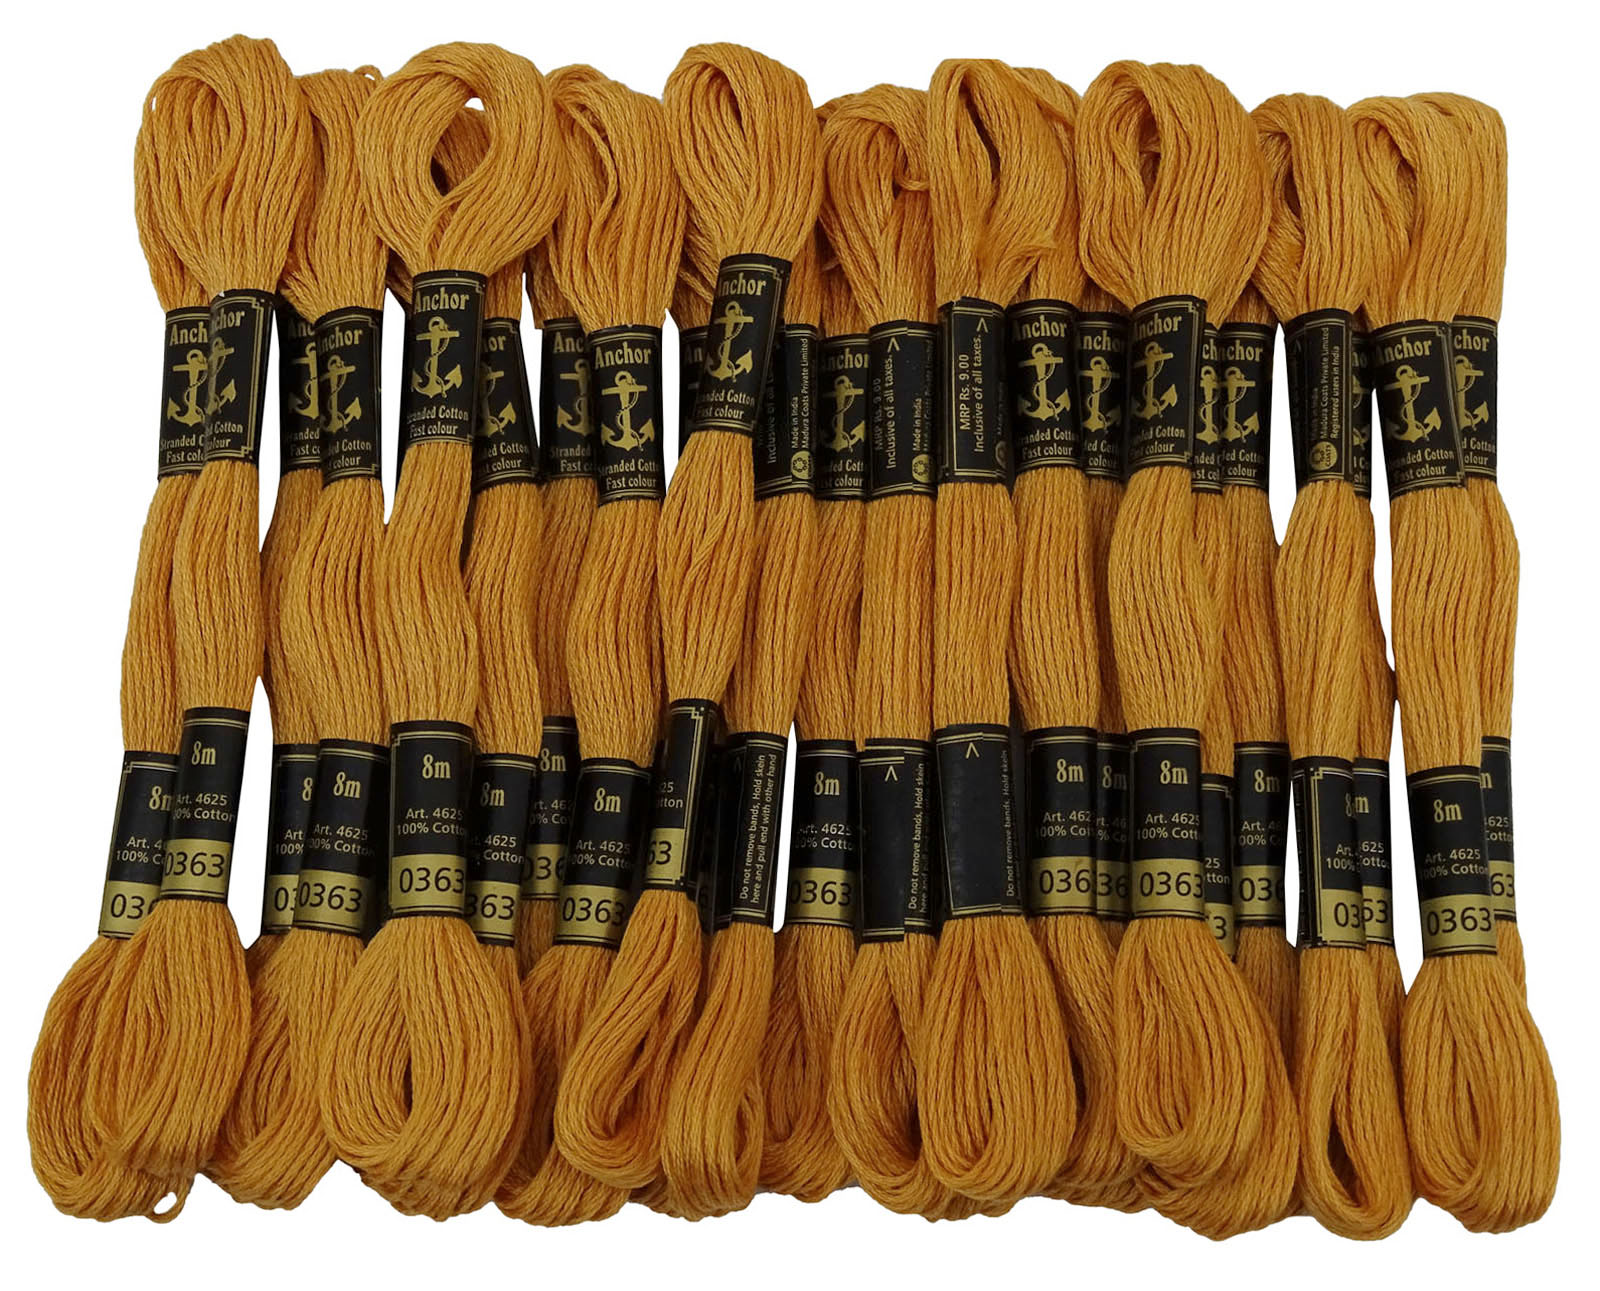 Anchor Stranded Cotton 8m Colours 291-313 100% Cotton Embroidery Thread Skeins 